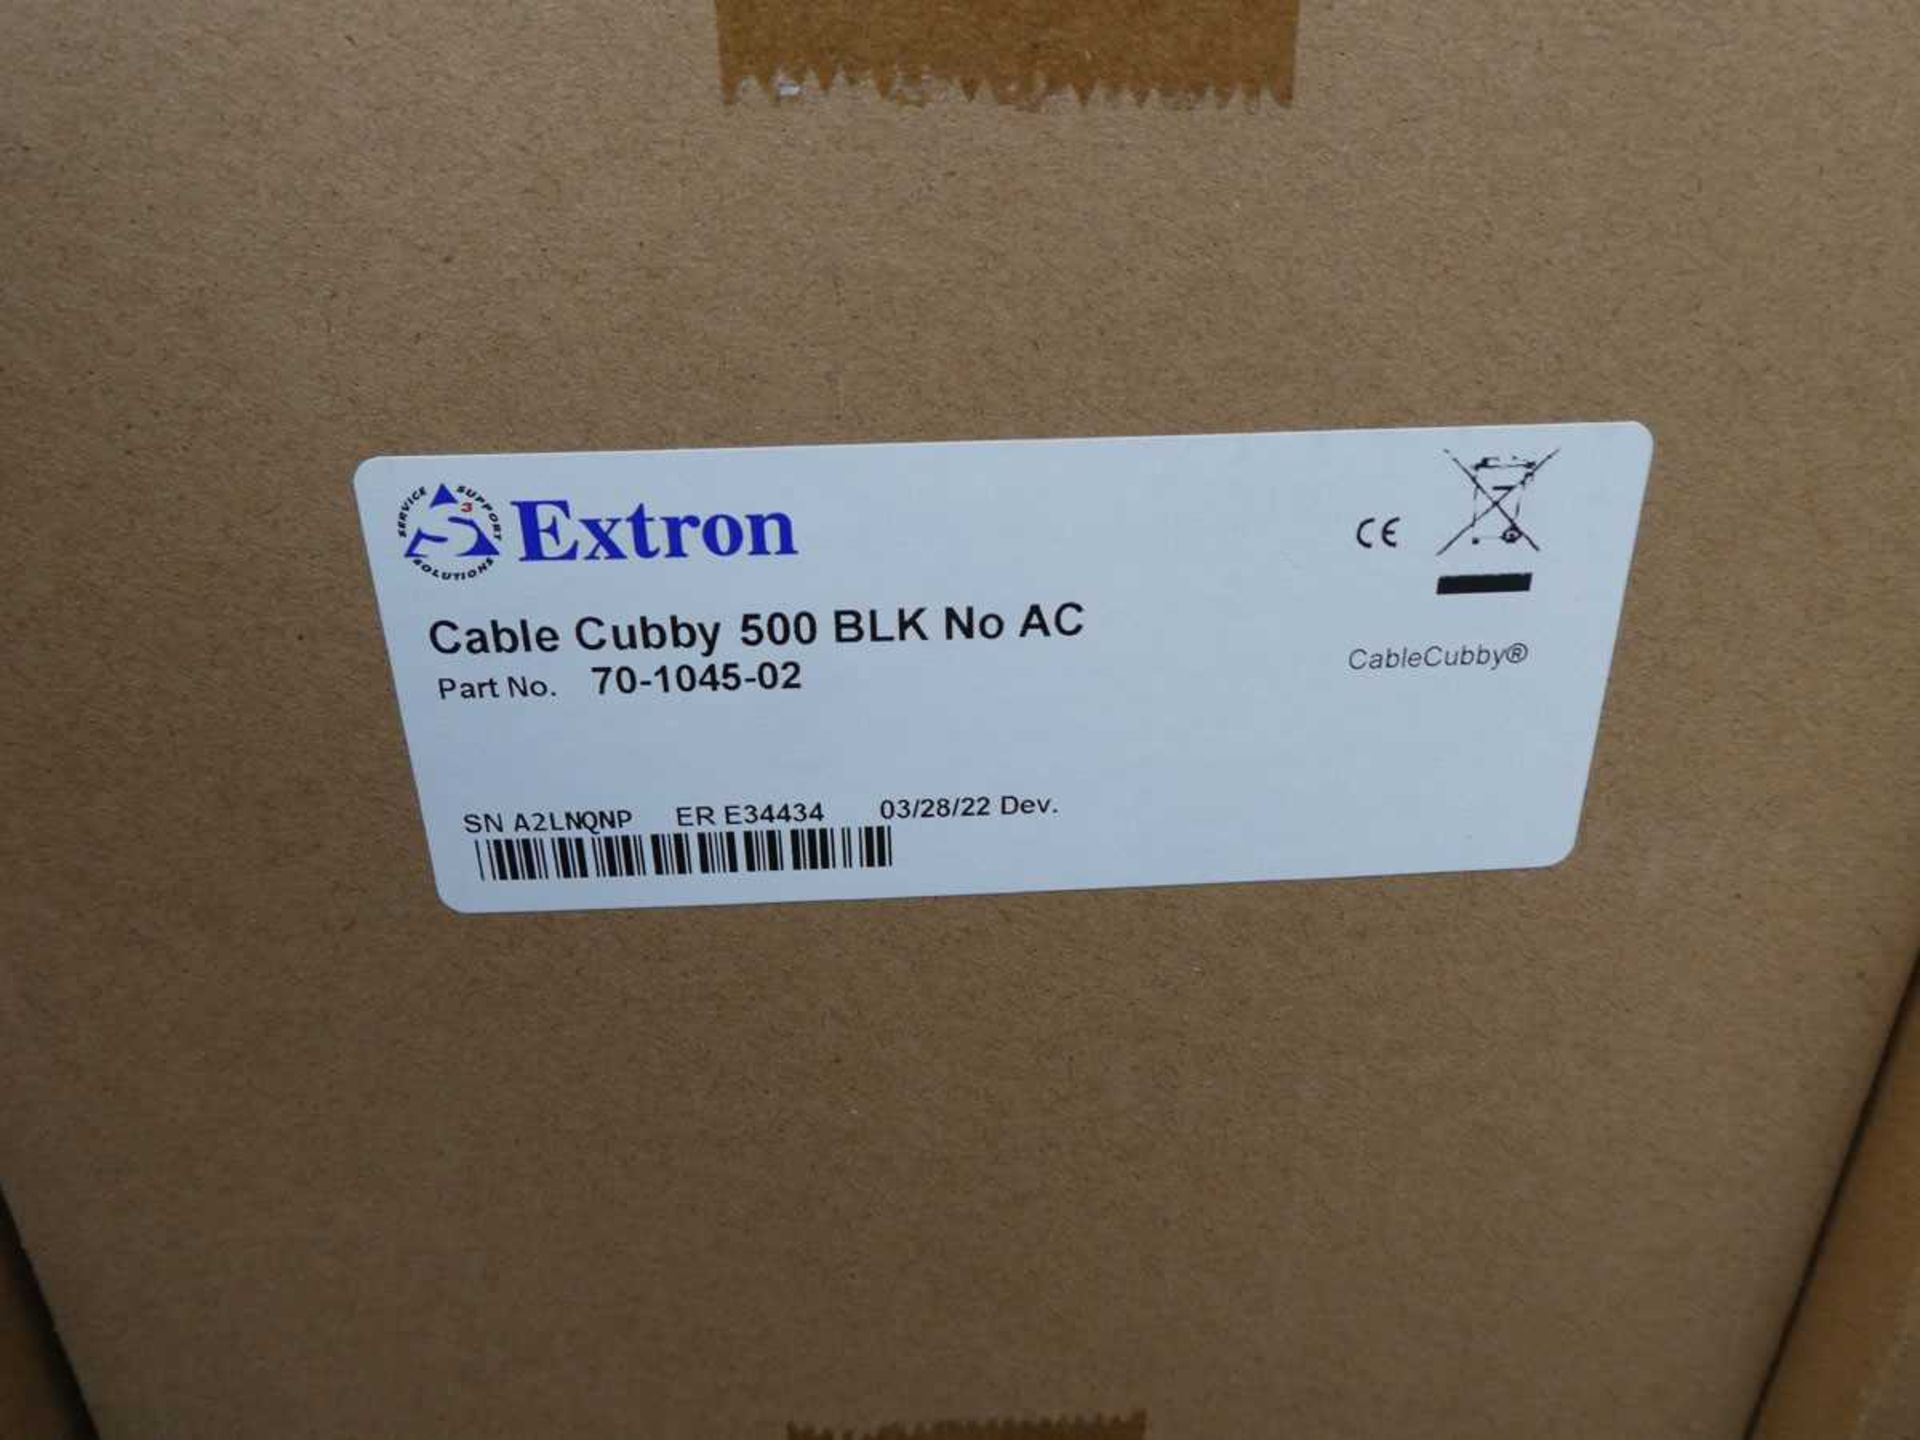 +VAT 32 Extron boxed cable cubby 500BLK, no AC - Image 2 of 3